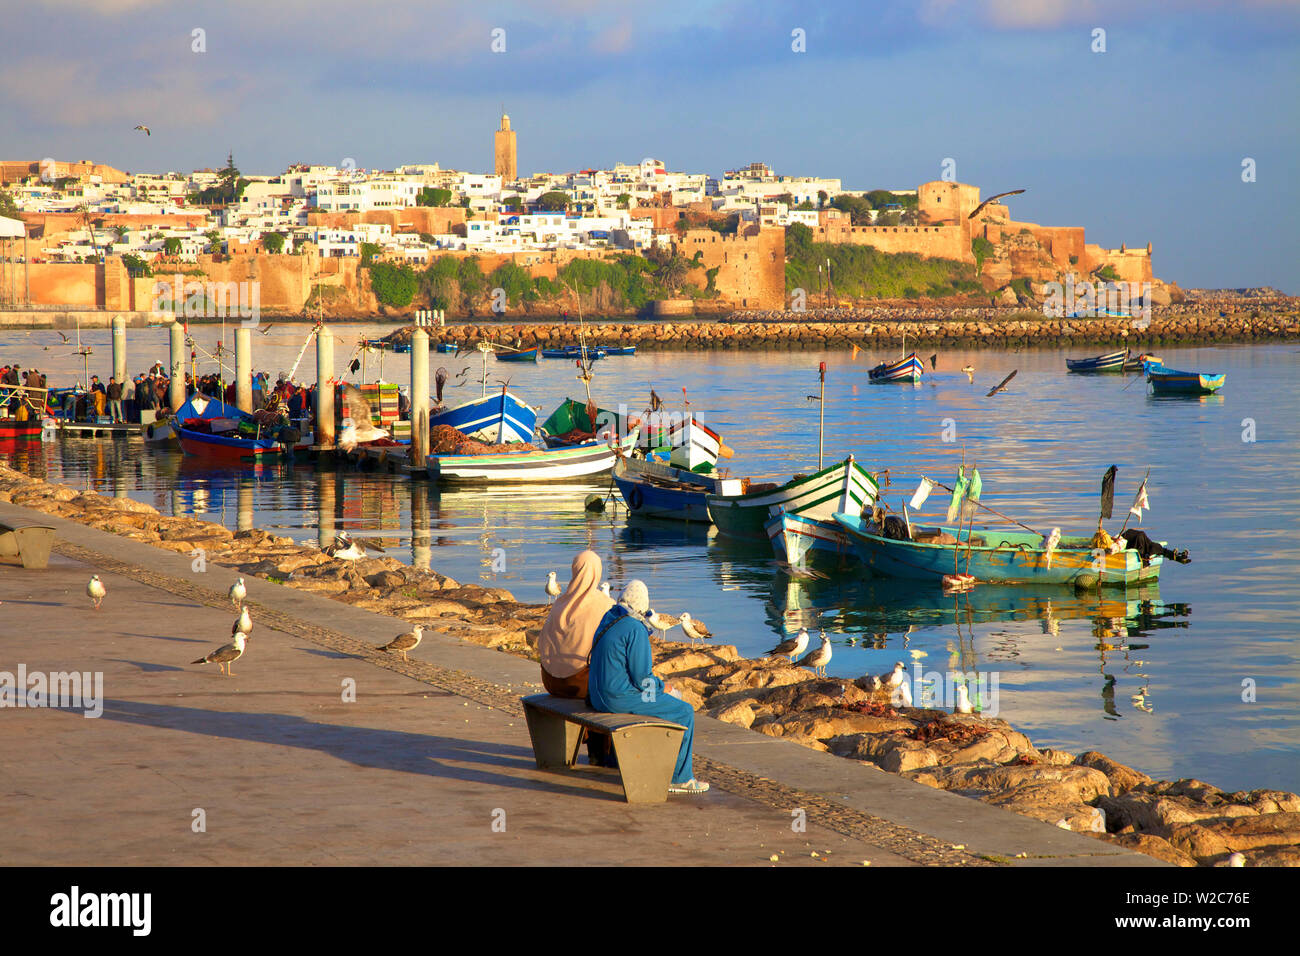 Harbour and Fishing Boats with Oudaia Kasbah and Coastline in Background, Rabat, Morocco, North Africa Stock Photo